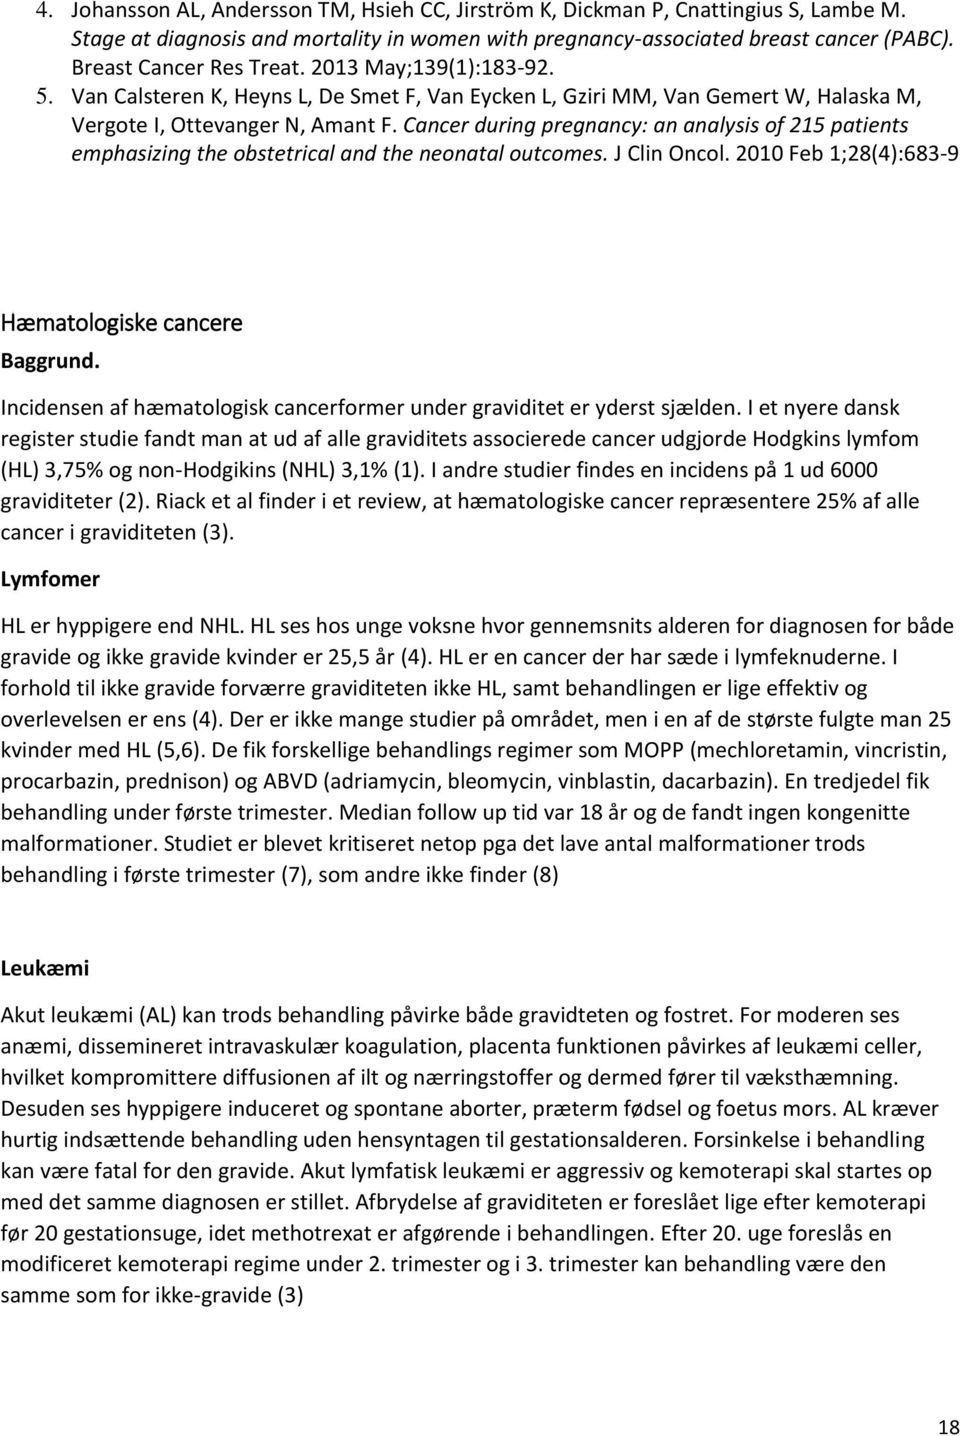 Cancer during pregnancy: an analysis of 215 patients emphasizing the obstetrical and the neonatal outcomes. J Clin Oncol. 2010 Feb 1;28(4):683-9 Hæmatologiske cancere Baggrund.